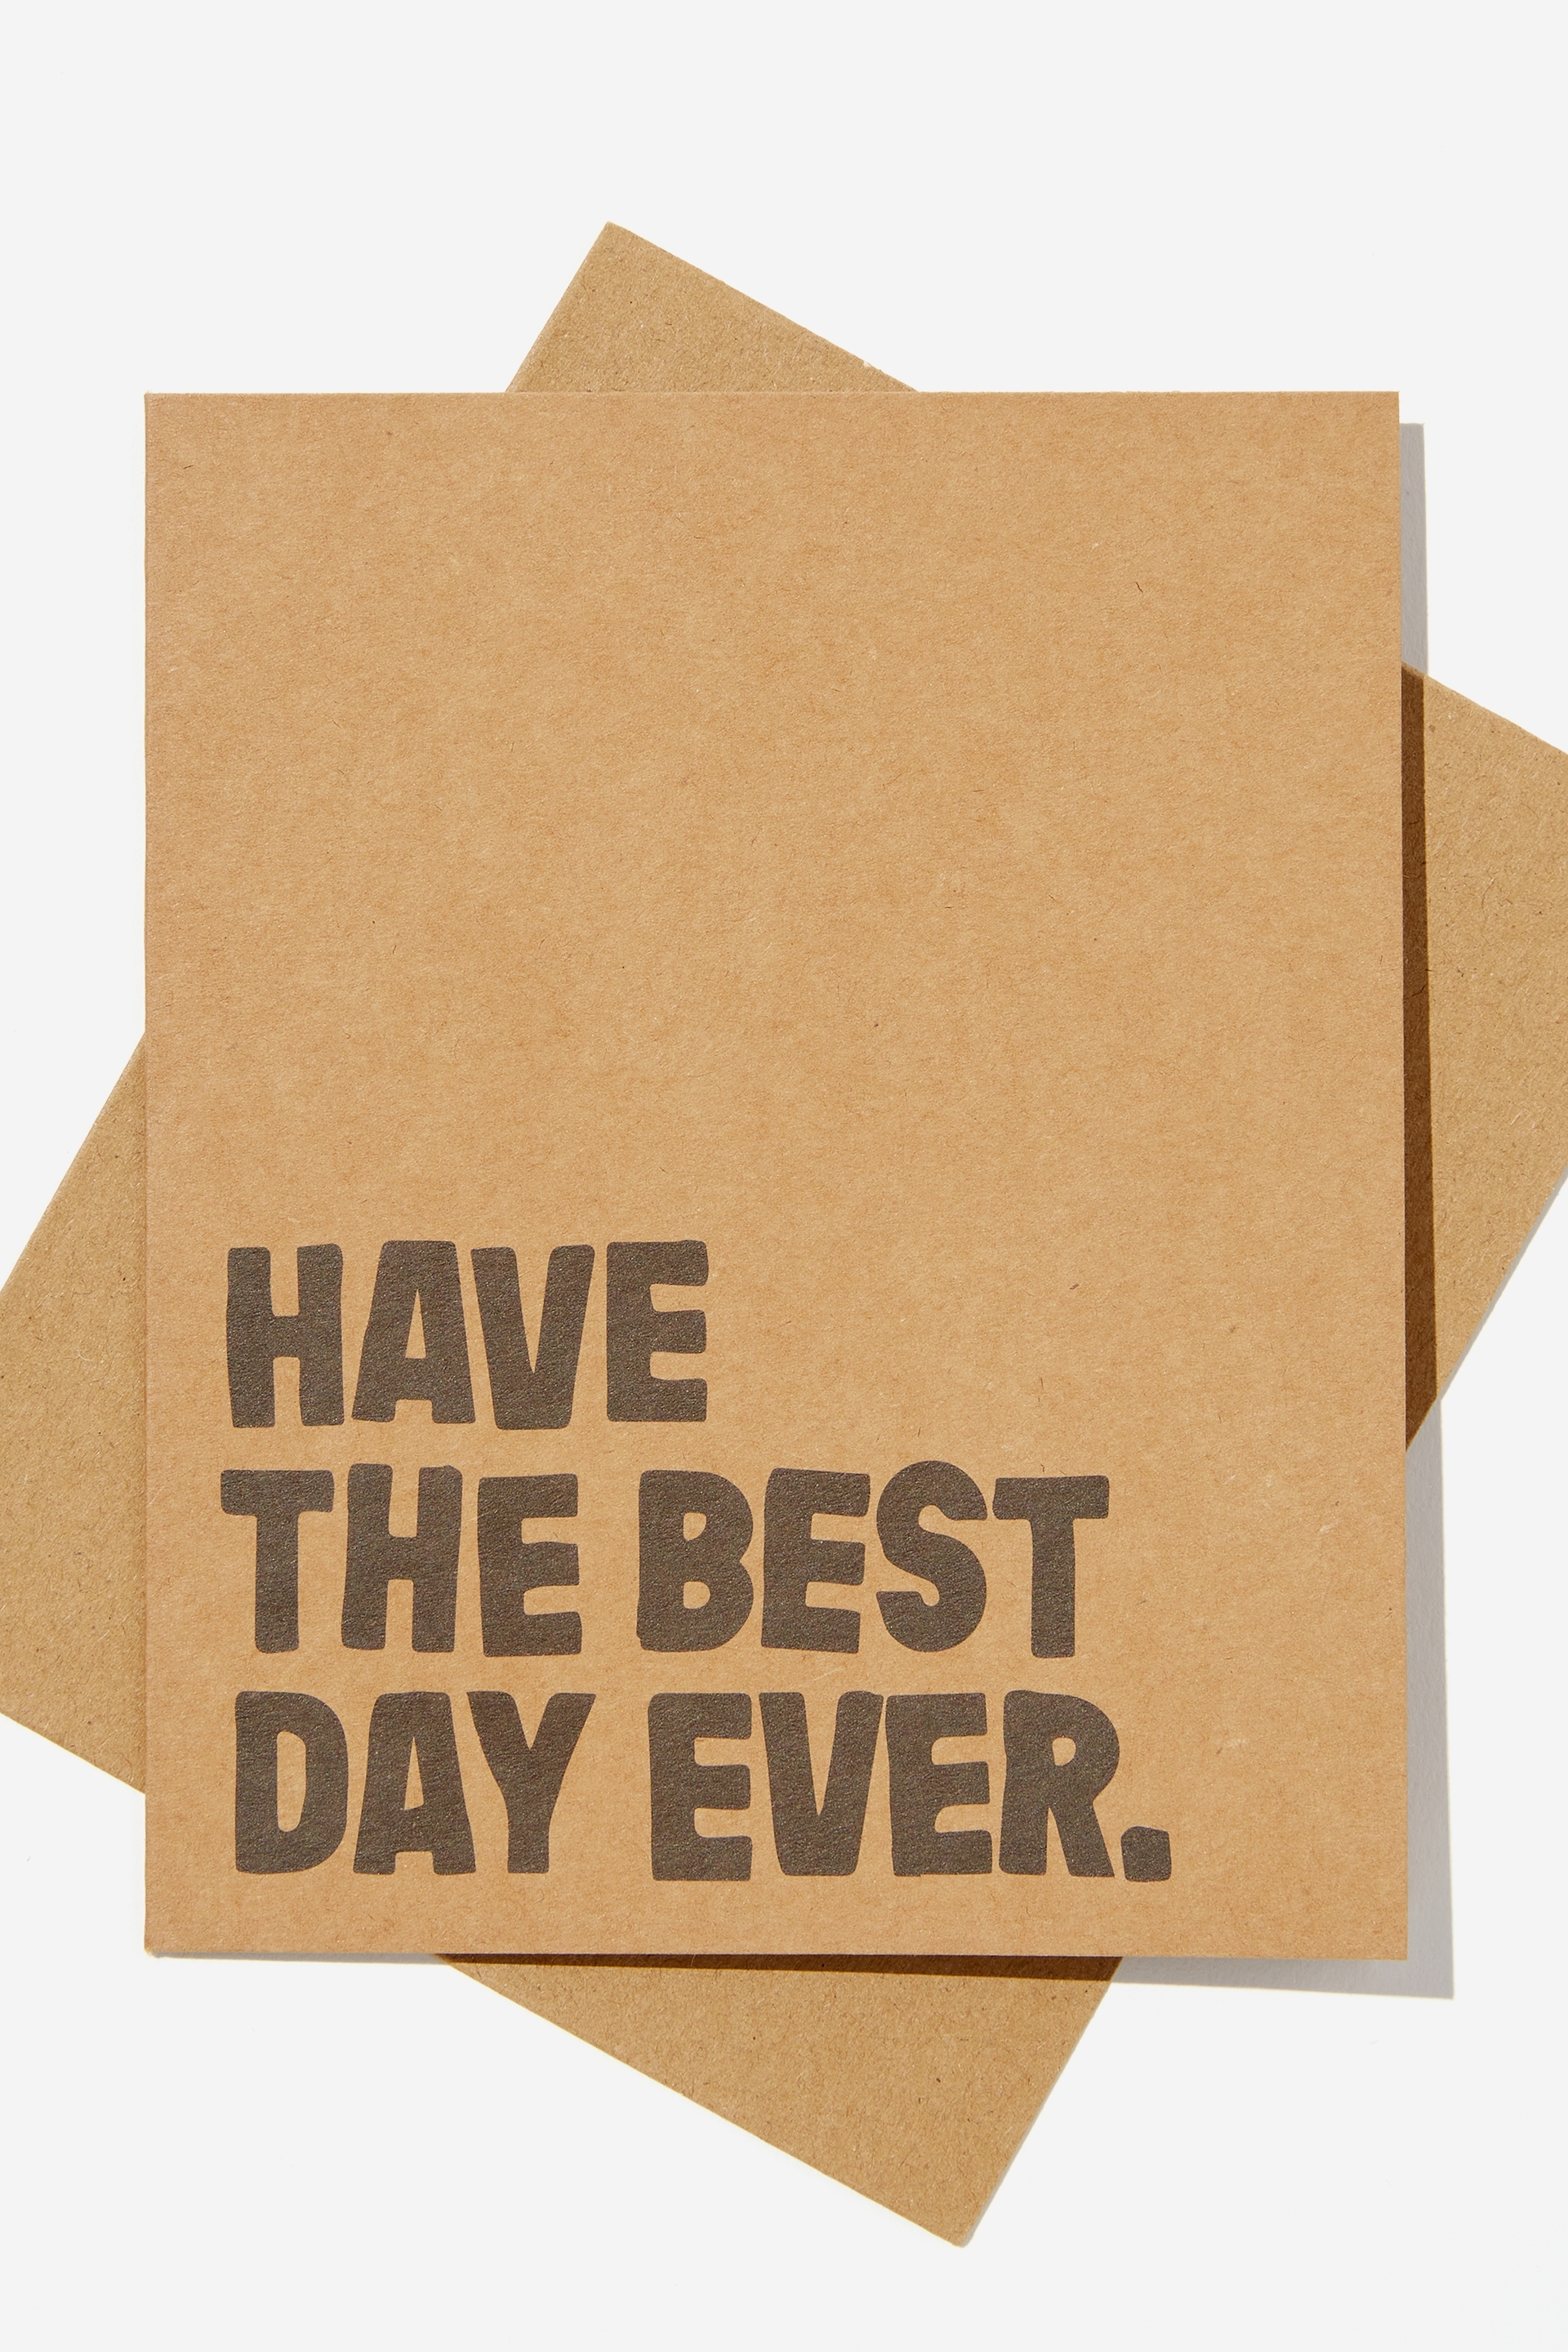 Typo - Nice Birthday Card - Have the best day ever craft